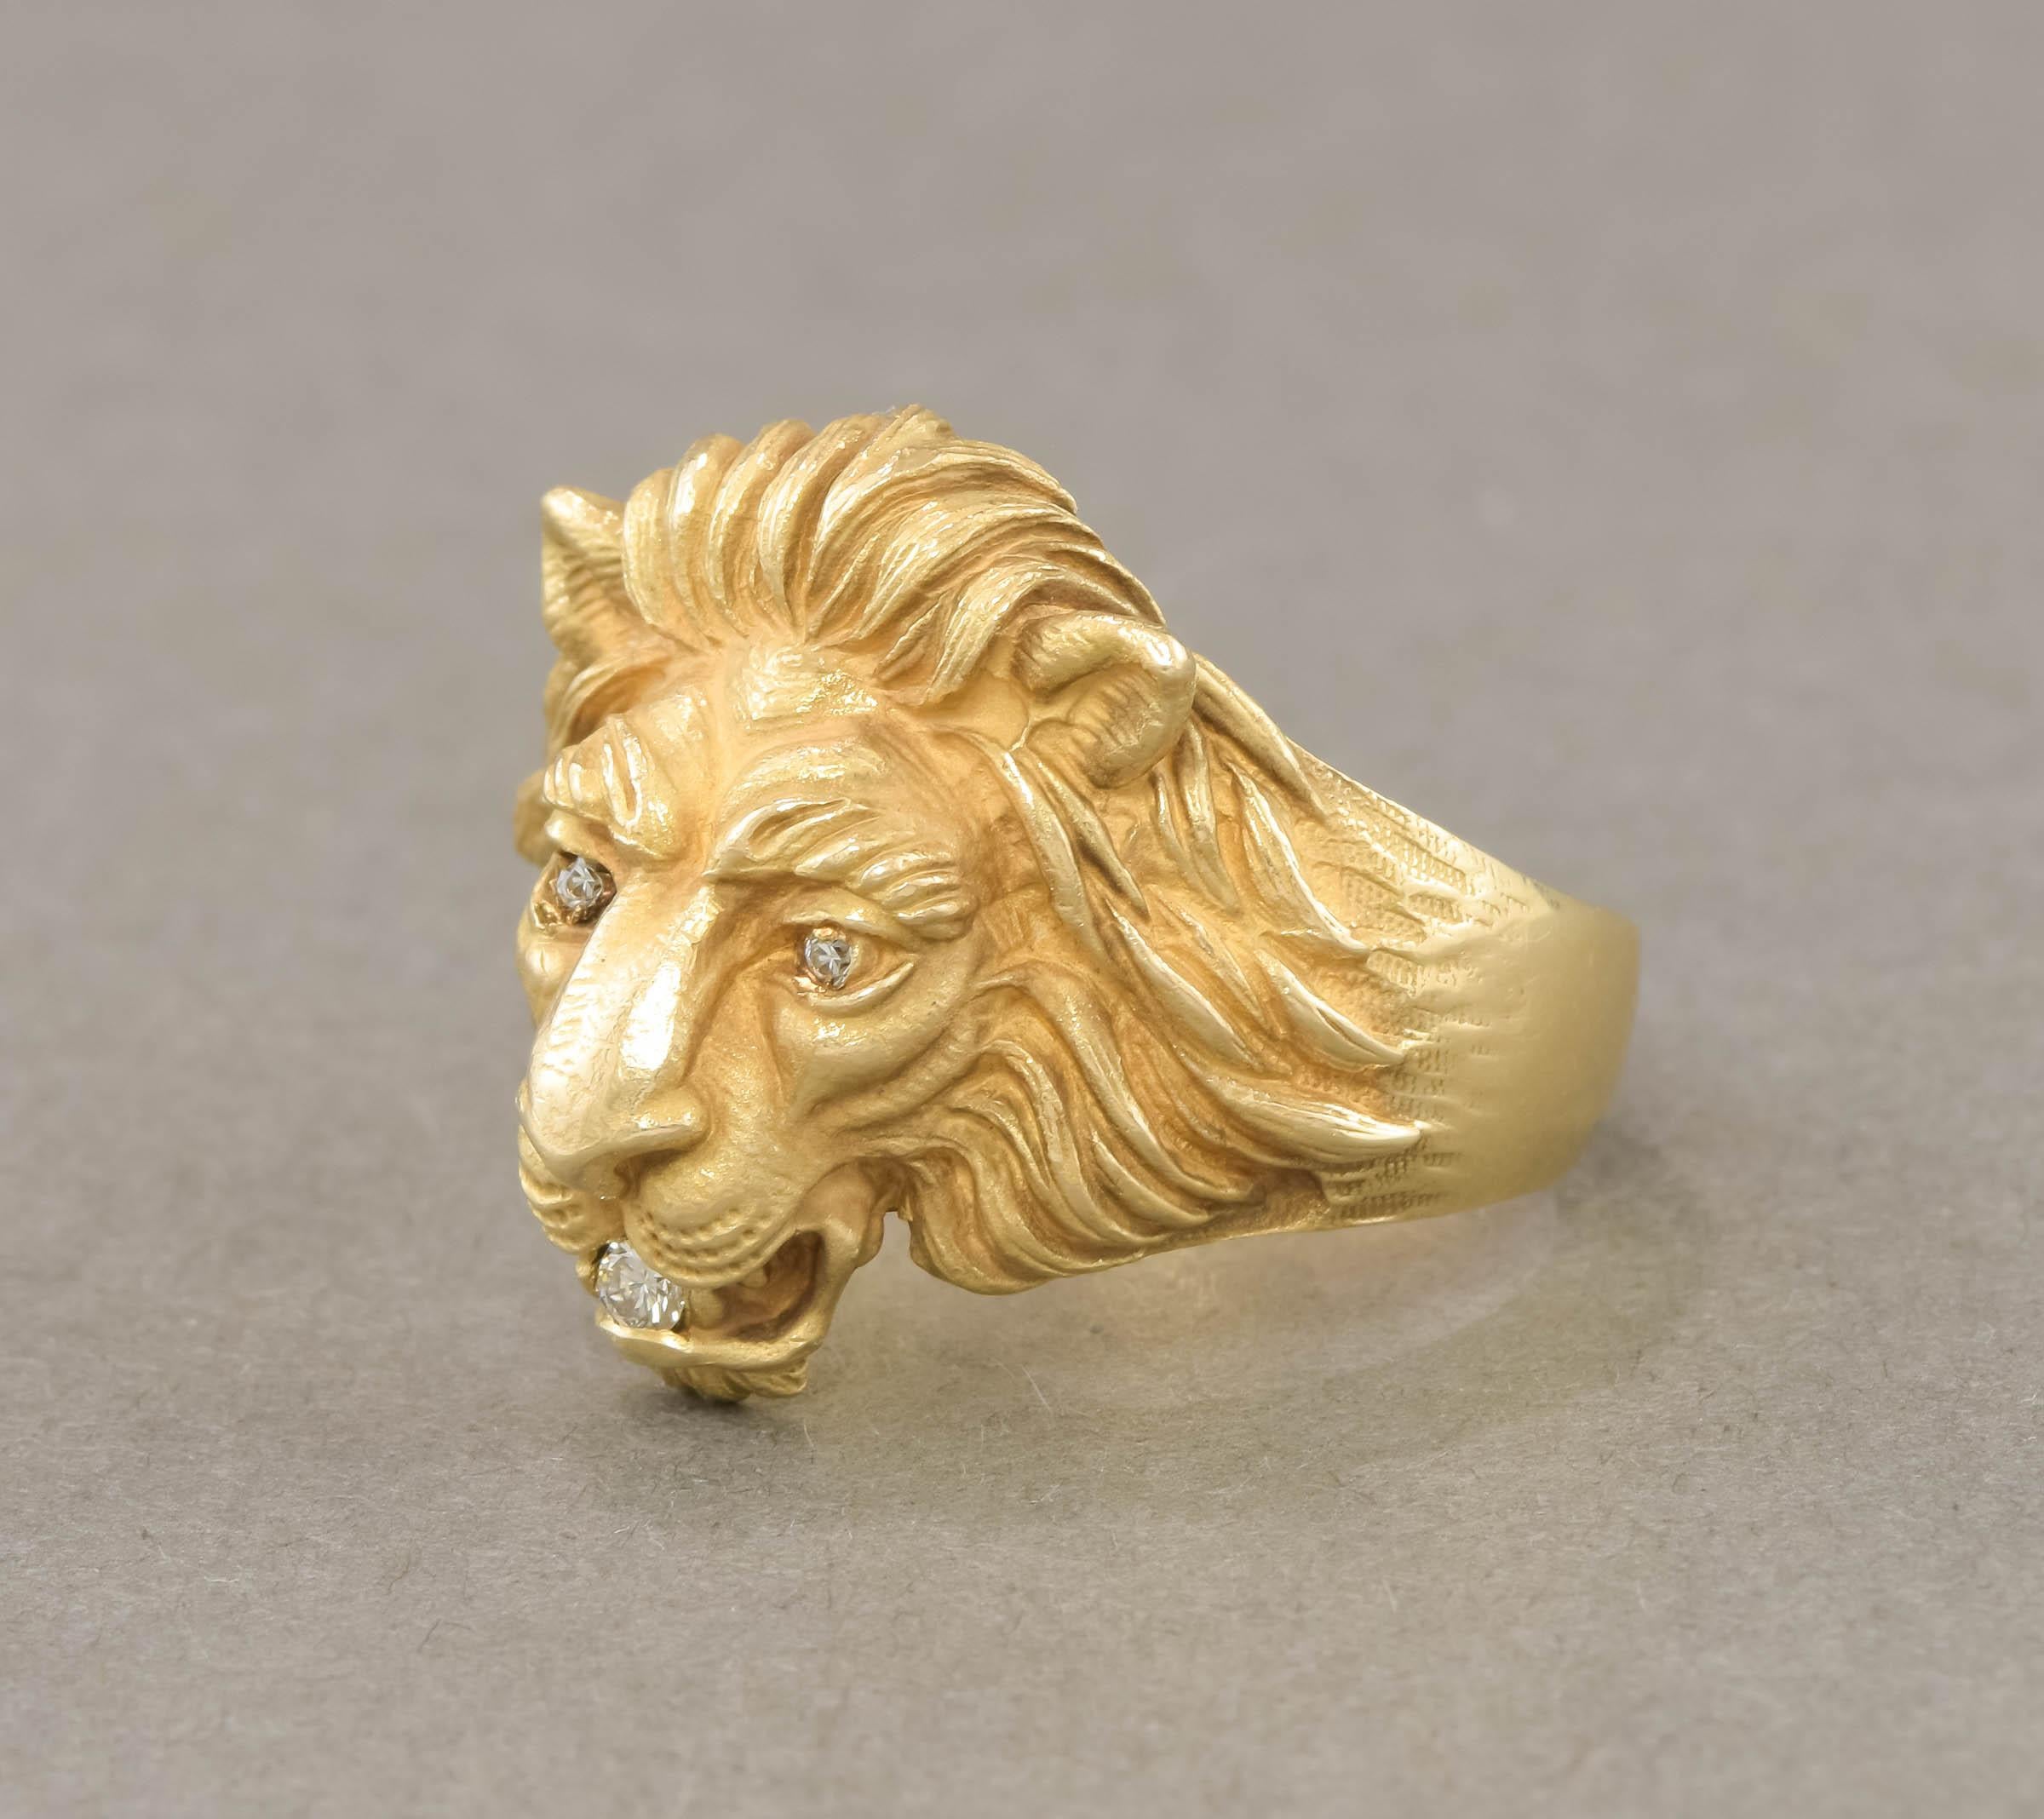 Brilliant Cut Heavy Detailed Gold Lion Ring with Diamonds by Baumstein Feder, circa 1950'S For Sale